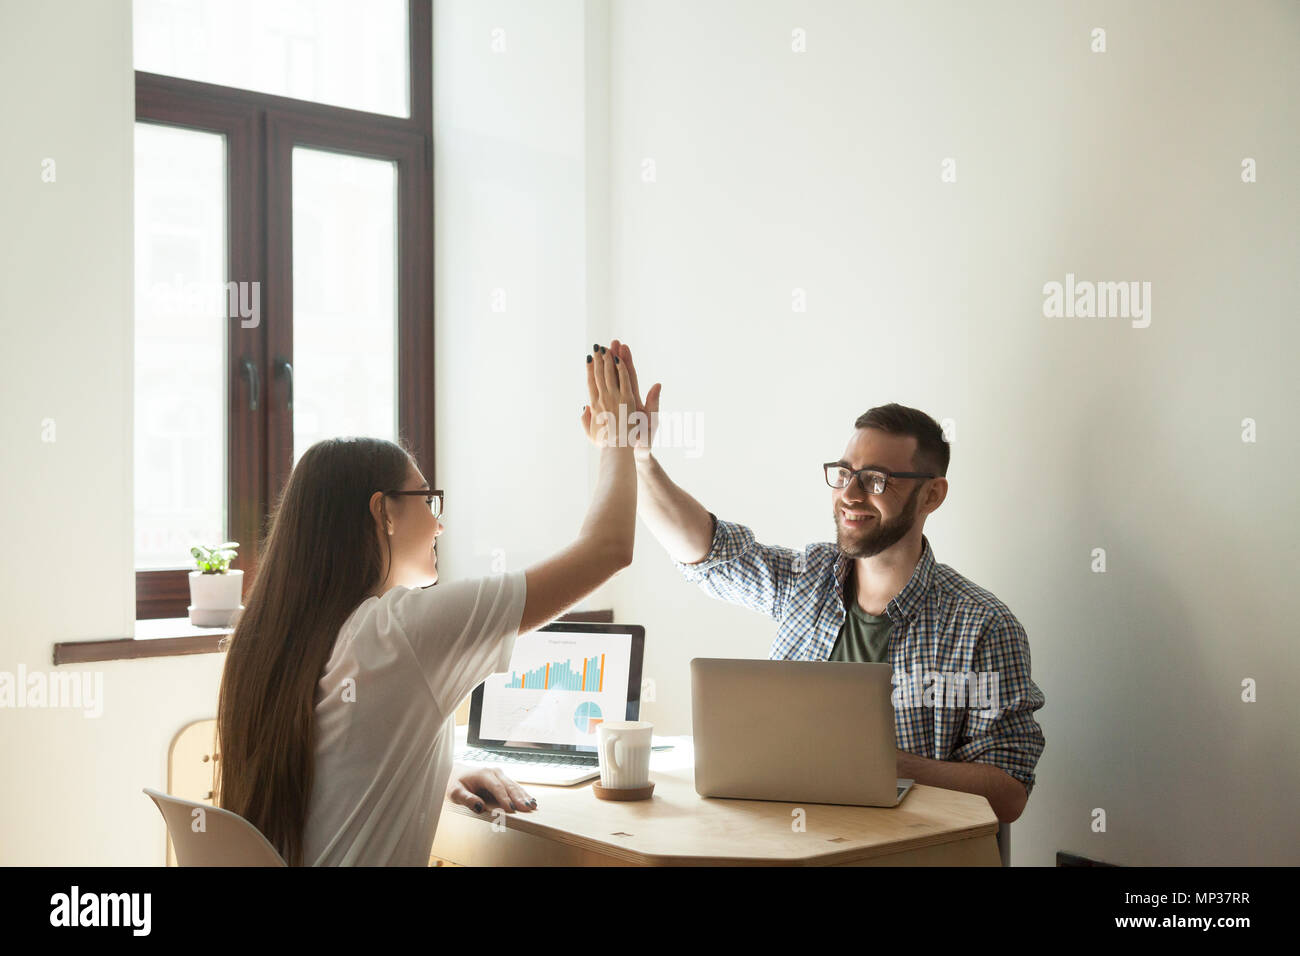 Freelance workers giving high five after successful project star Stock Photo